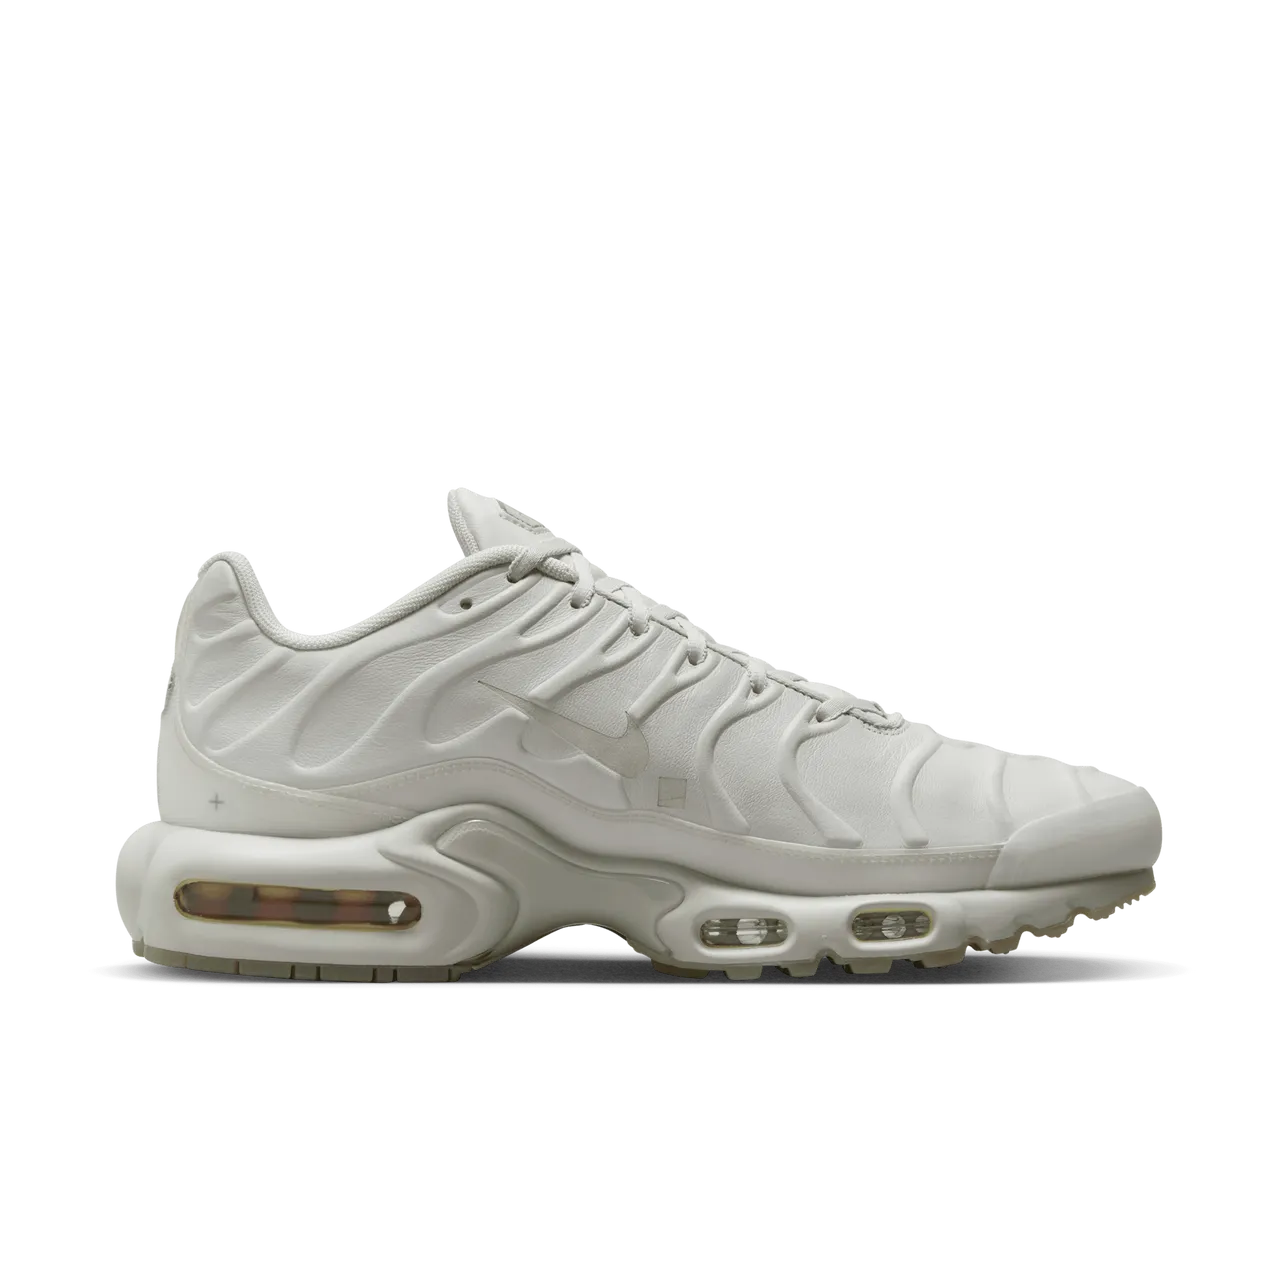 Nike Air Max Plus x A-COLD-WALL* Men's Shoes - Grey